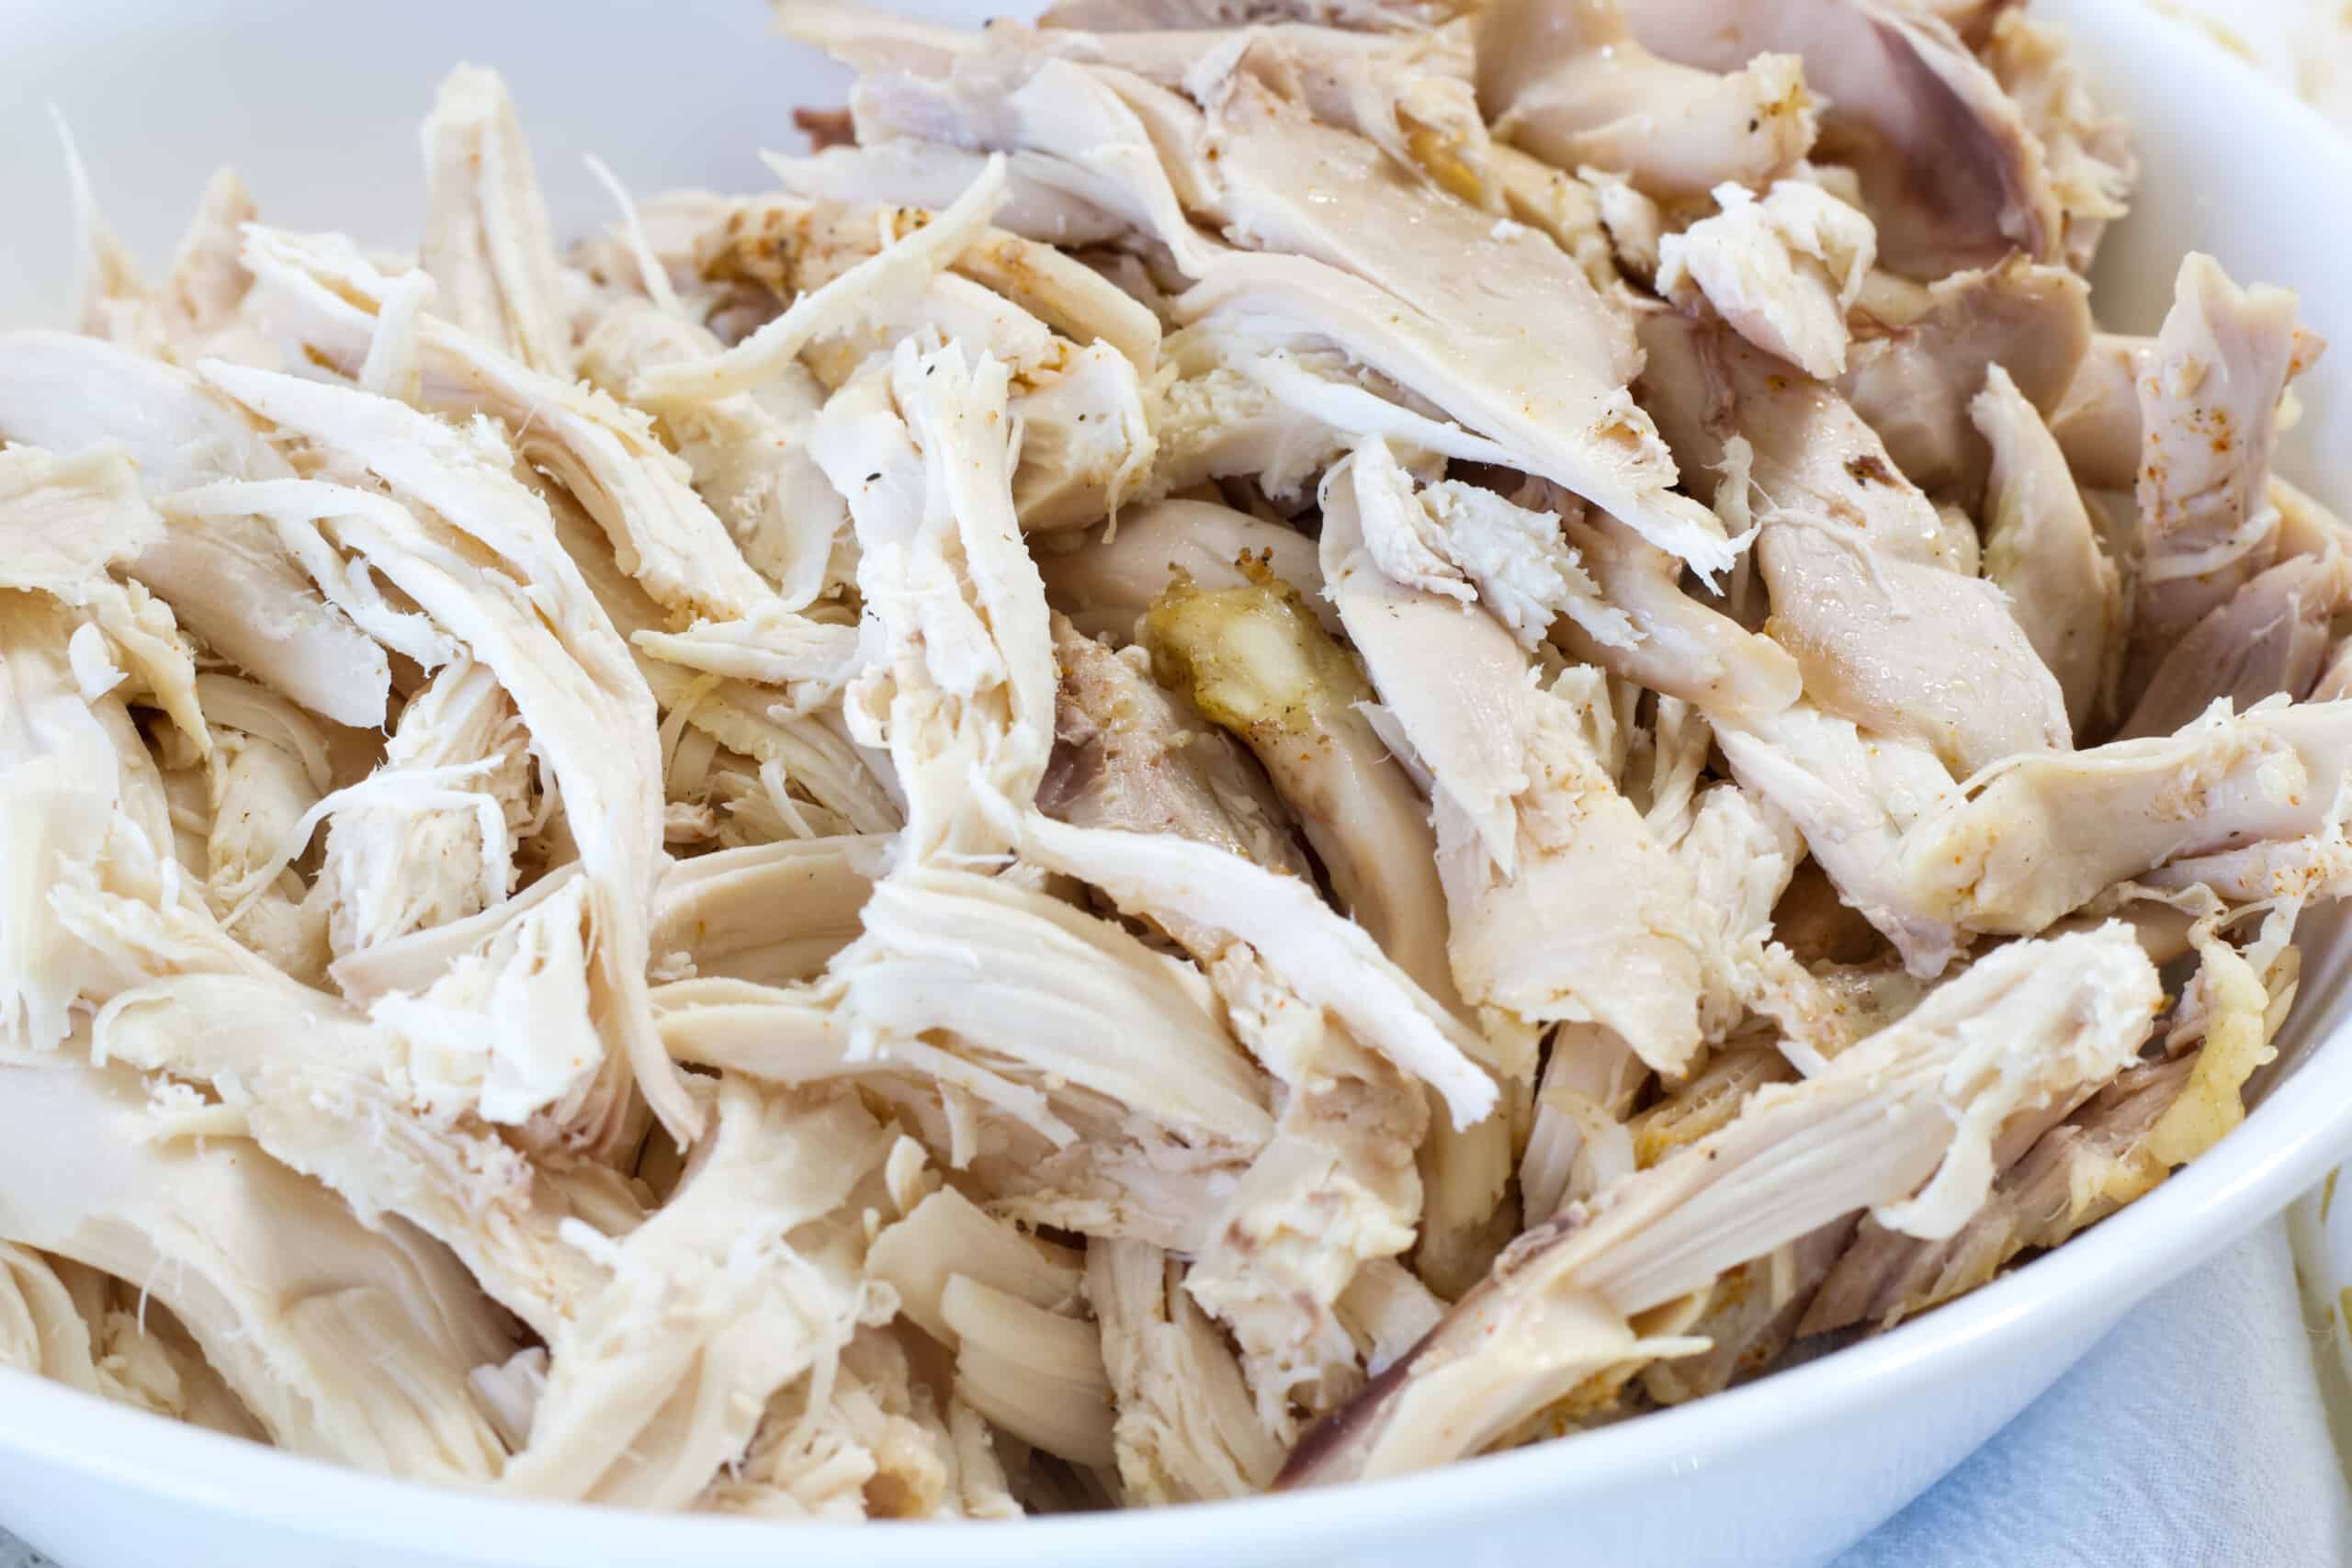 Close up of the shredded rotisserie style chicken in a white bowl.